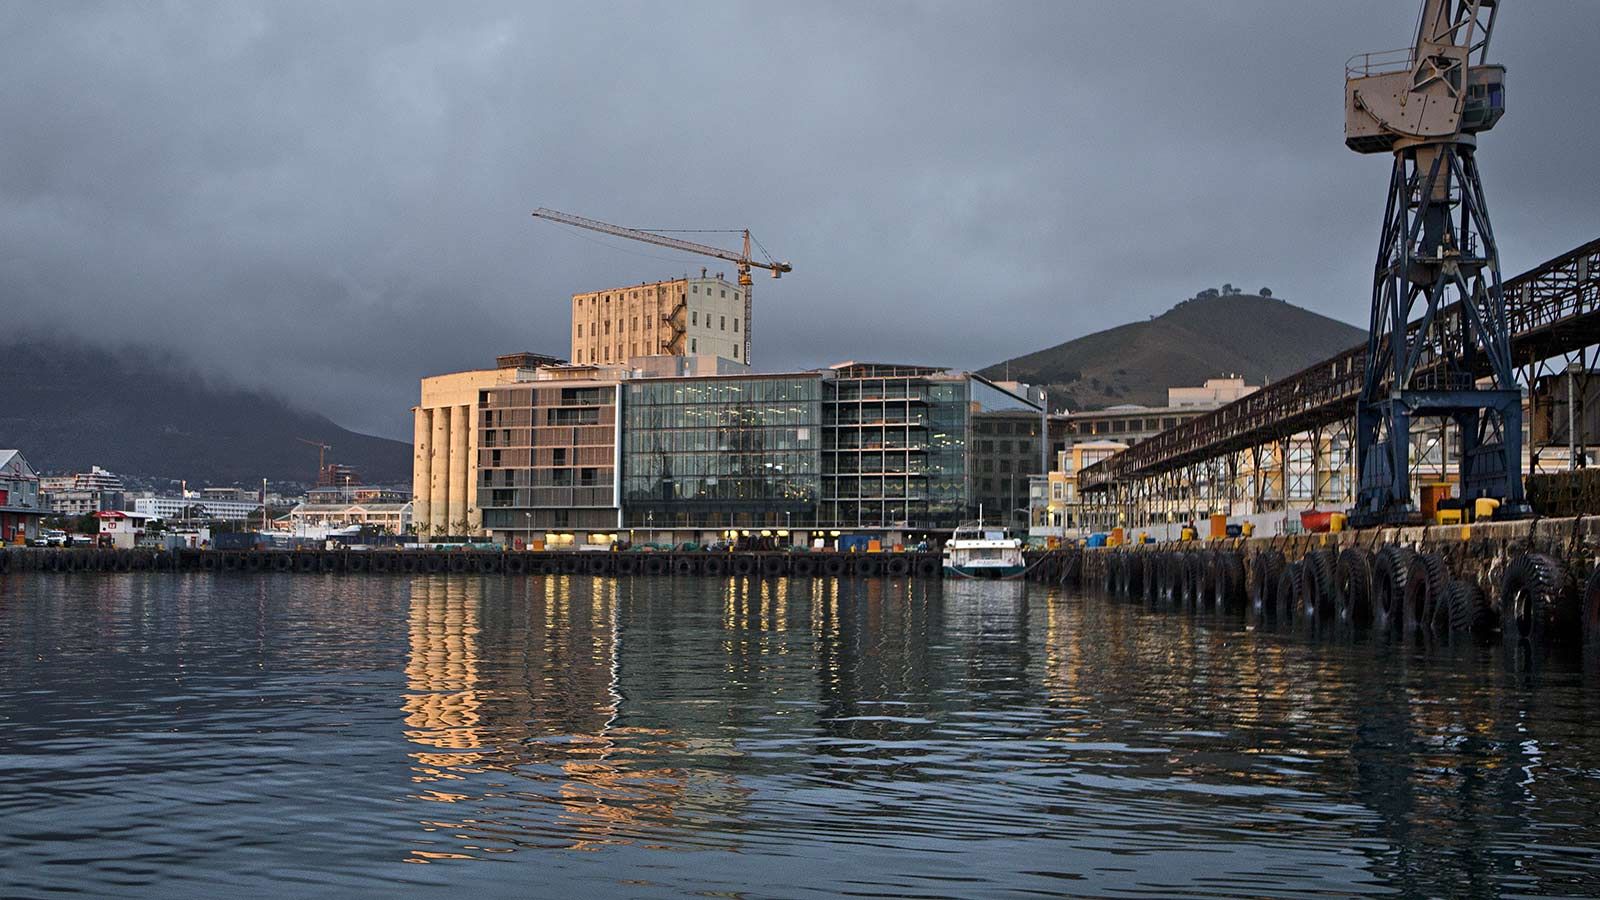 V&A Waterfront a New Development in the Heart of Cape Town - Mace Group